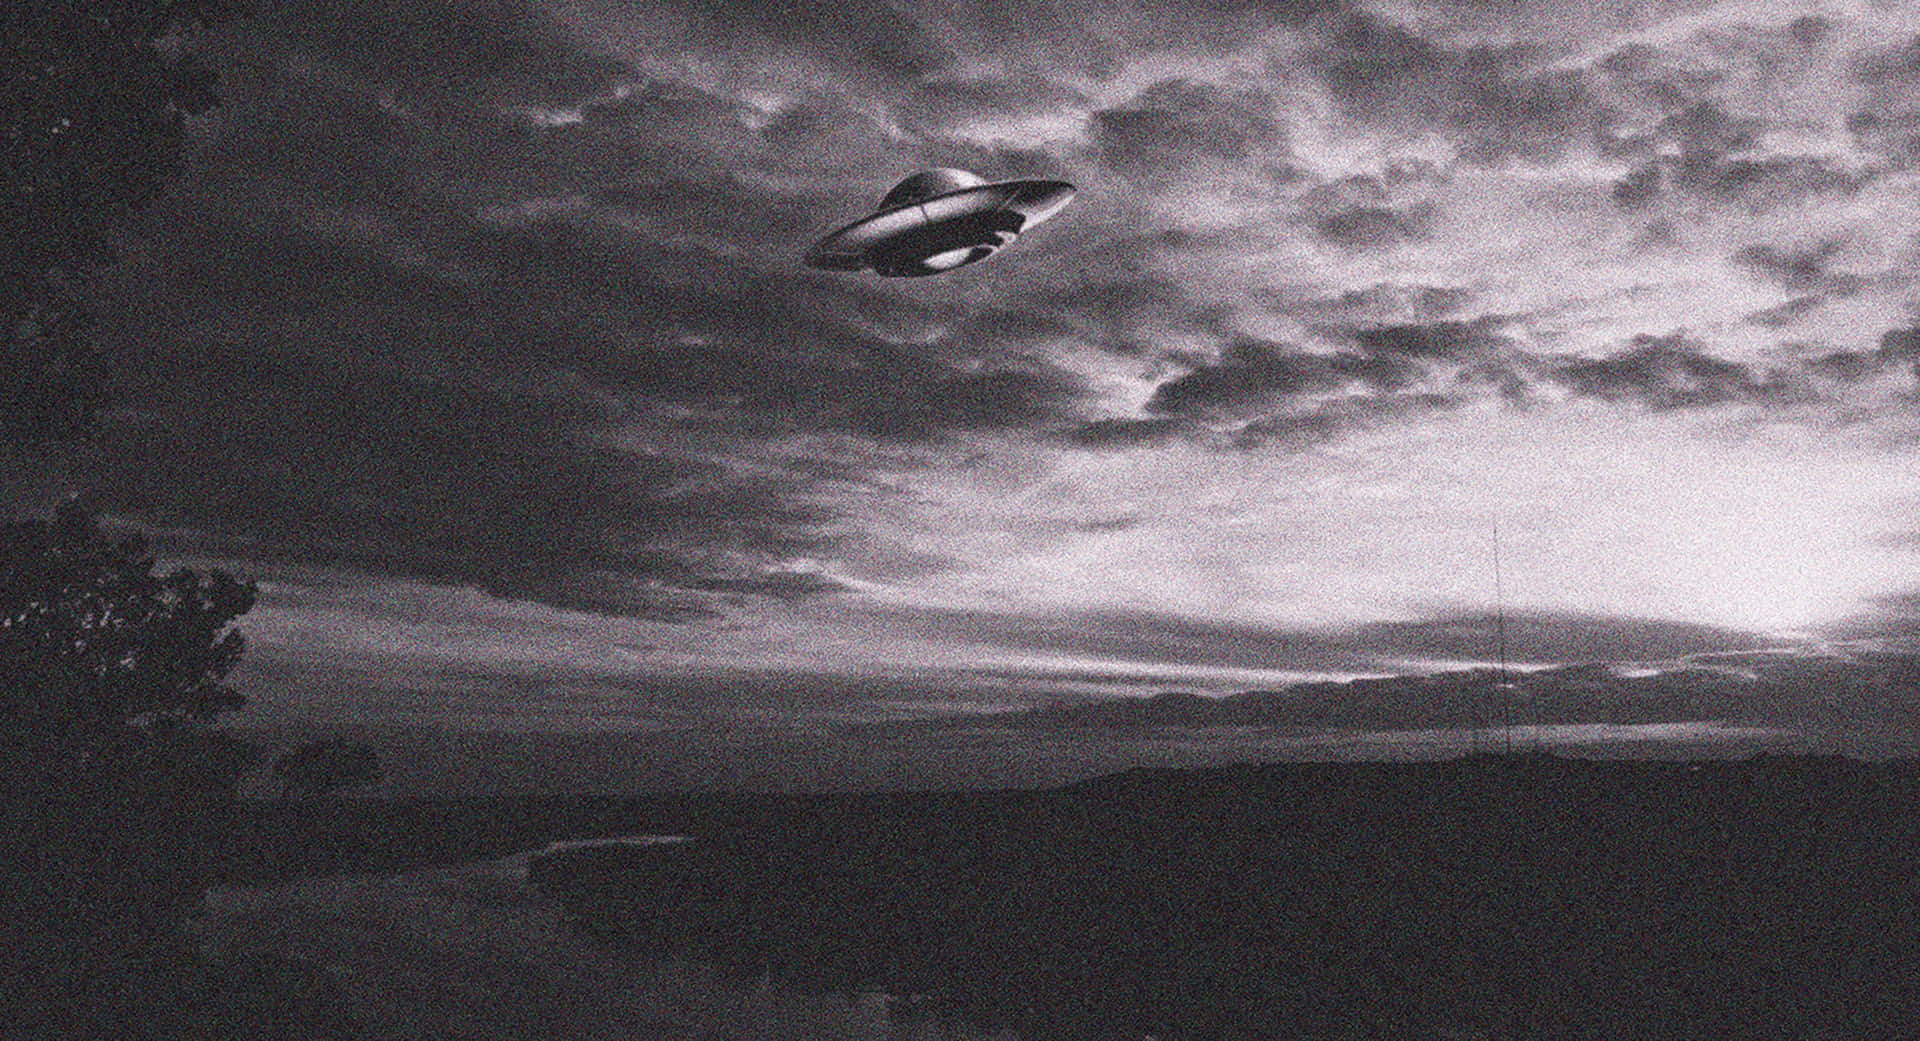 A mysterious unidentified flying object hovering in the night sky